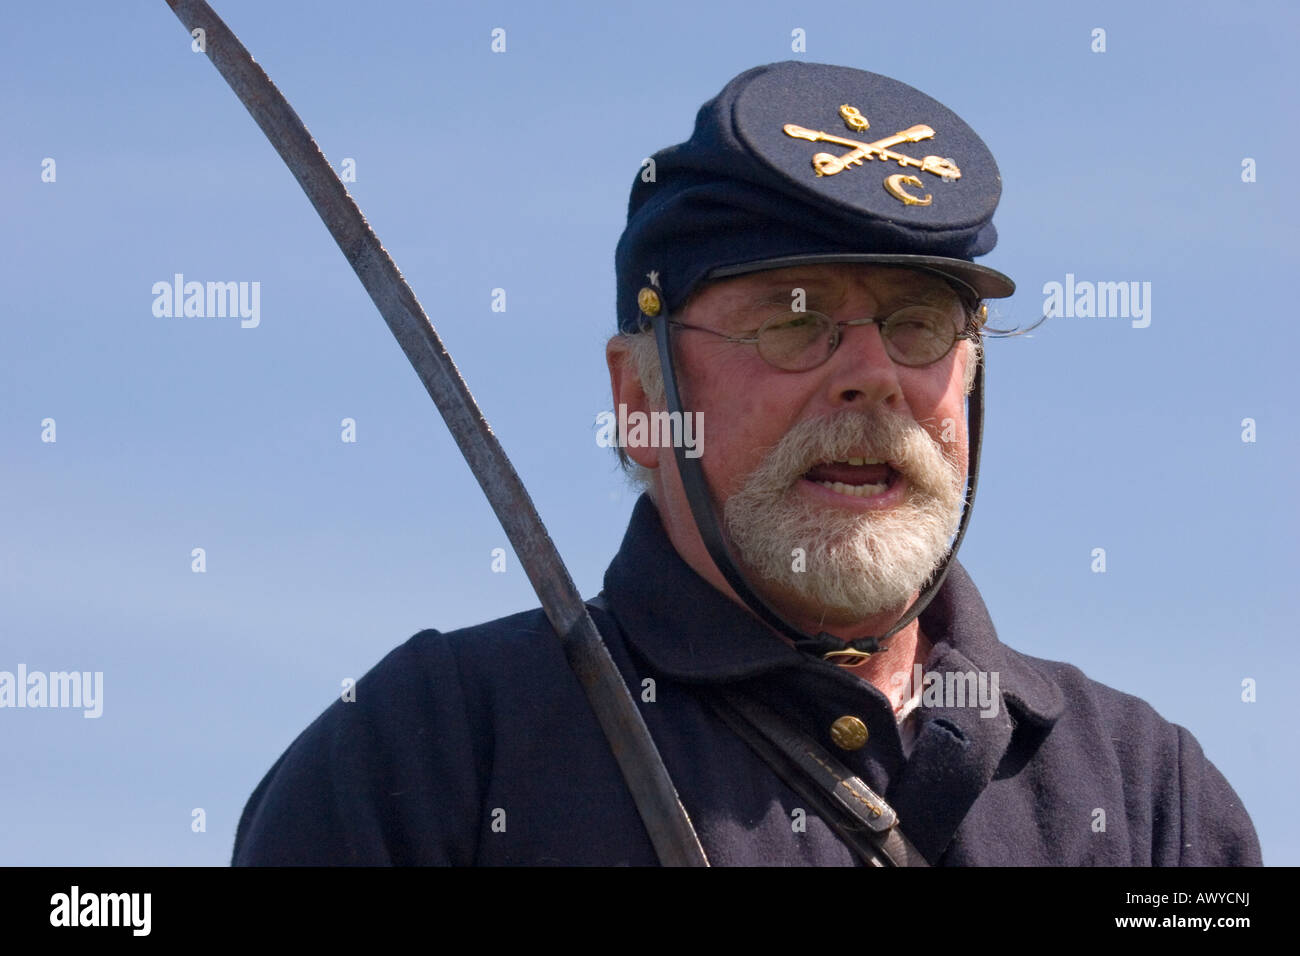 An actor dressed in an authentic uniform of the Union Army in the American Civil War, holding a saber. Stock Photo